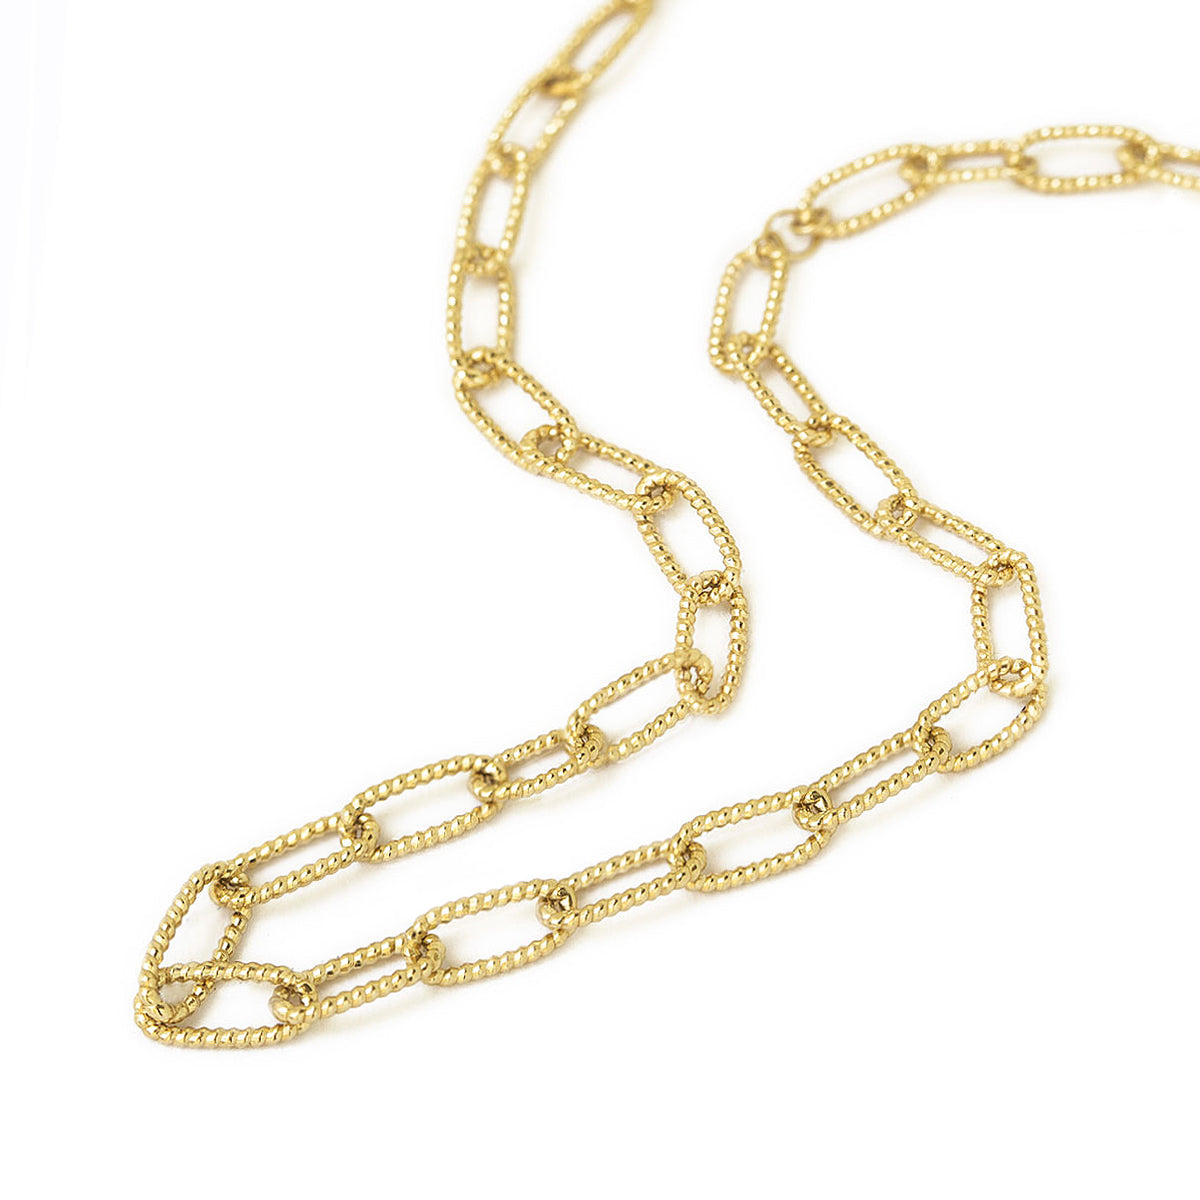 Gold Chain Necklace, Statement Necklace, Chunky Chain, Gold Link